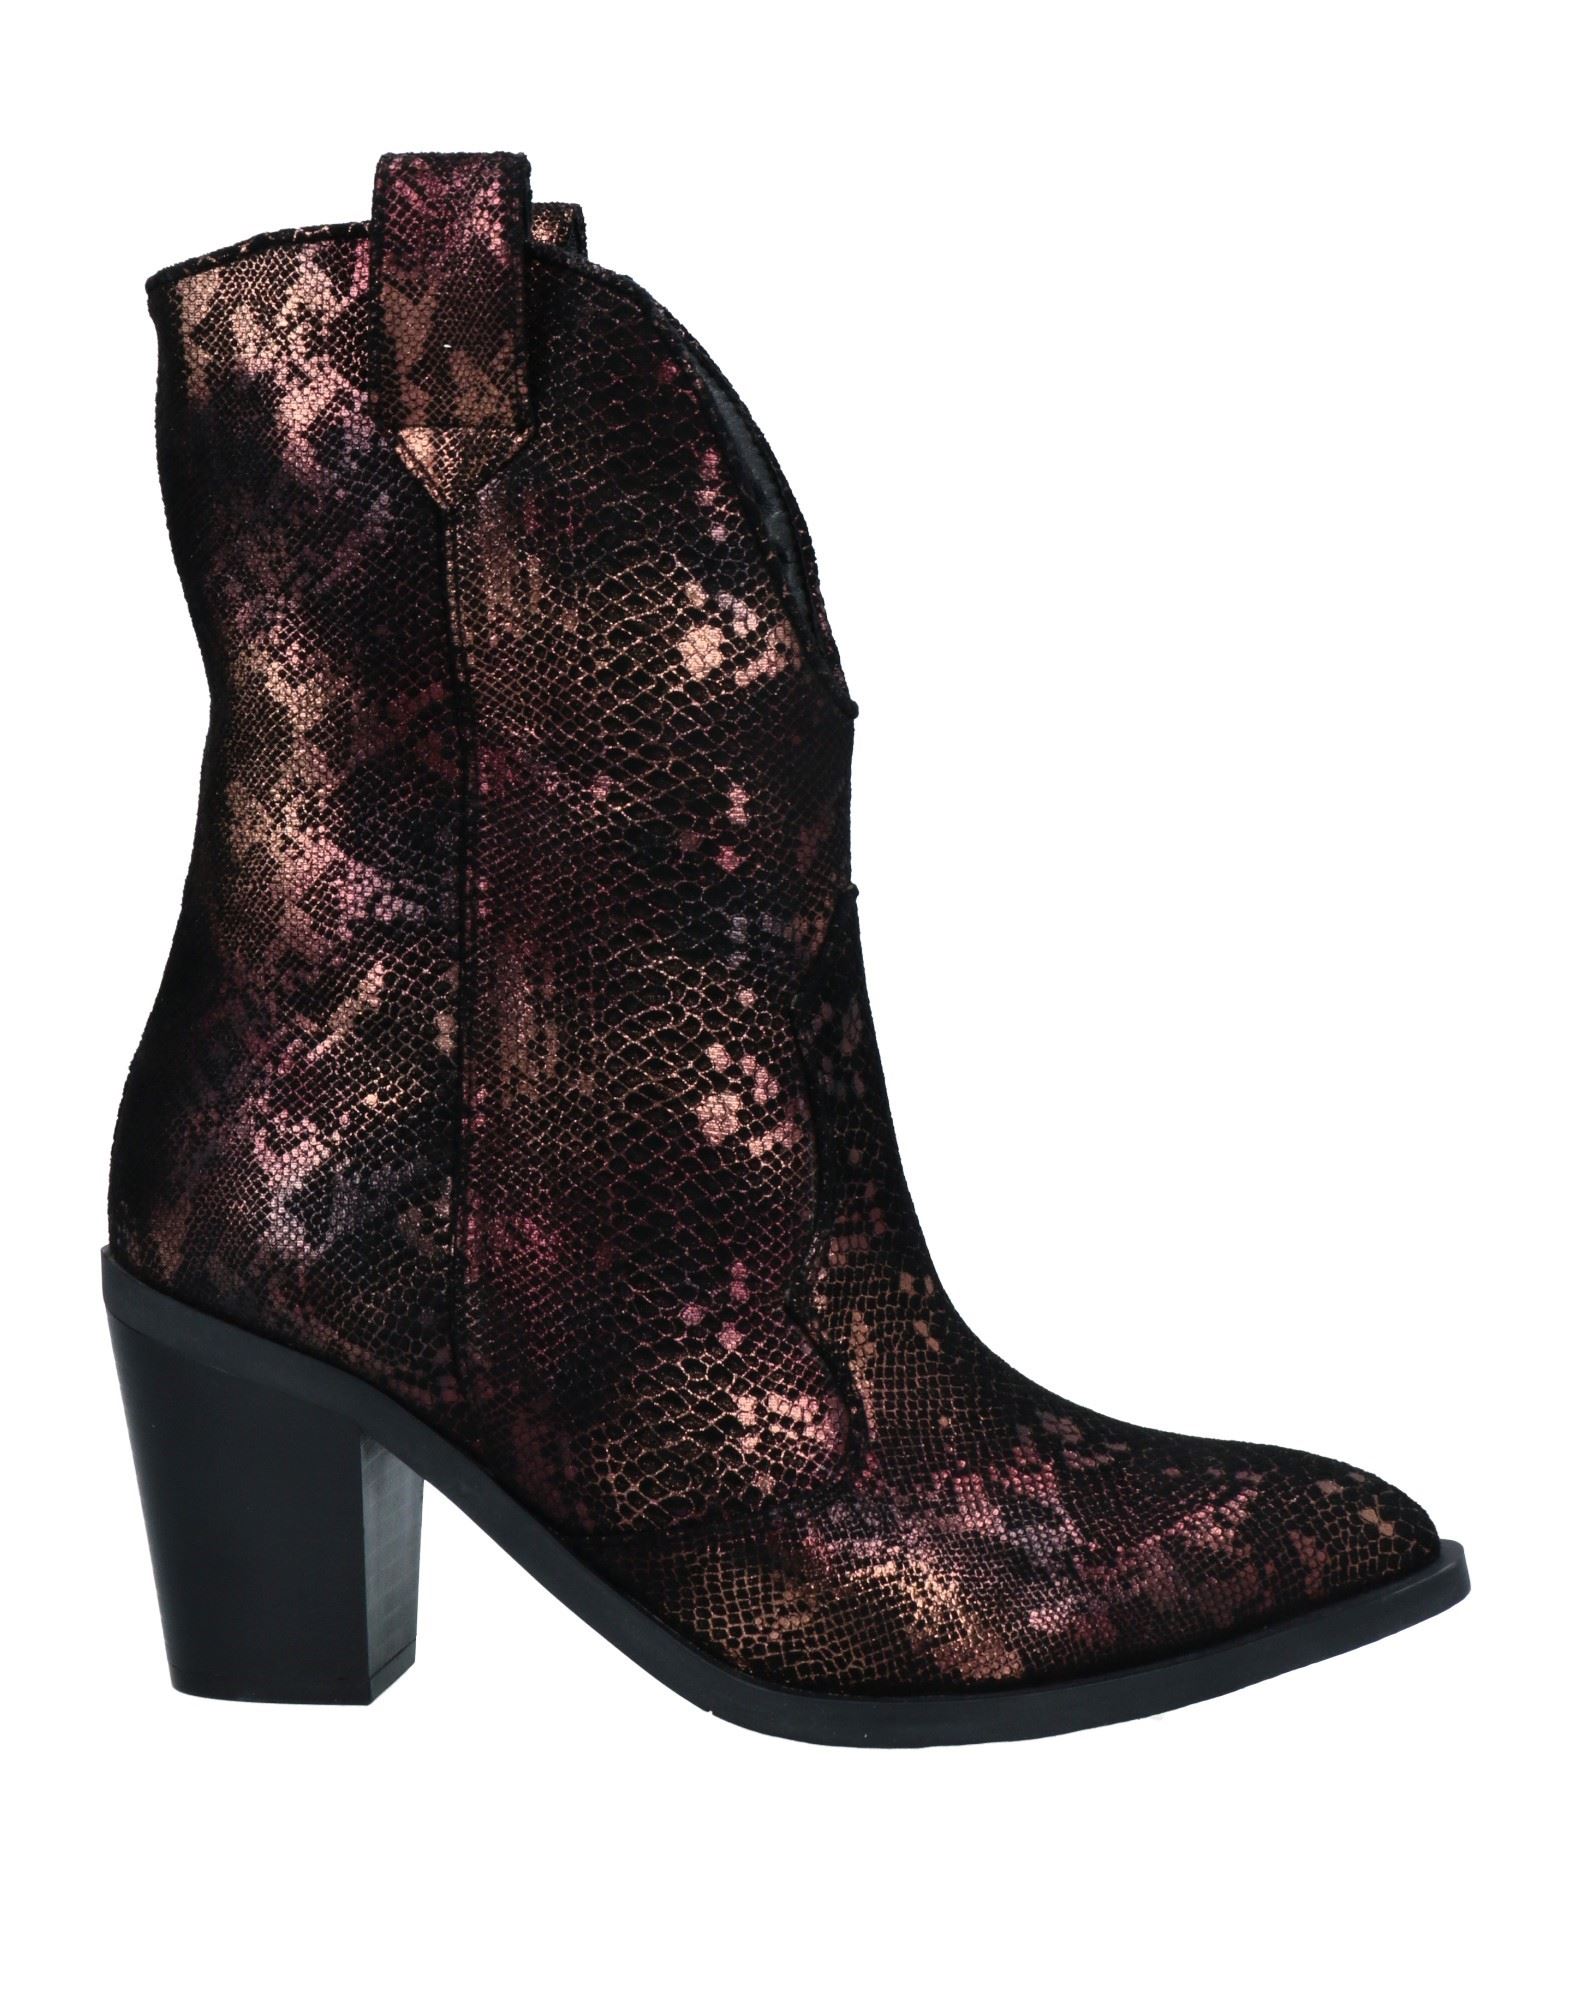 Brawn's Ankle Boots In Black